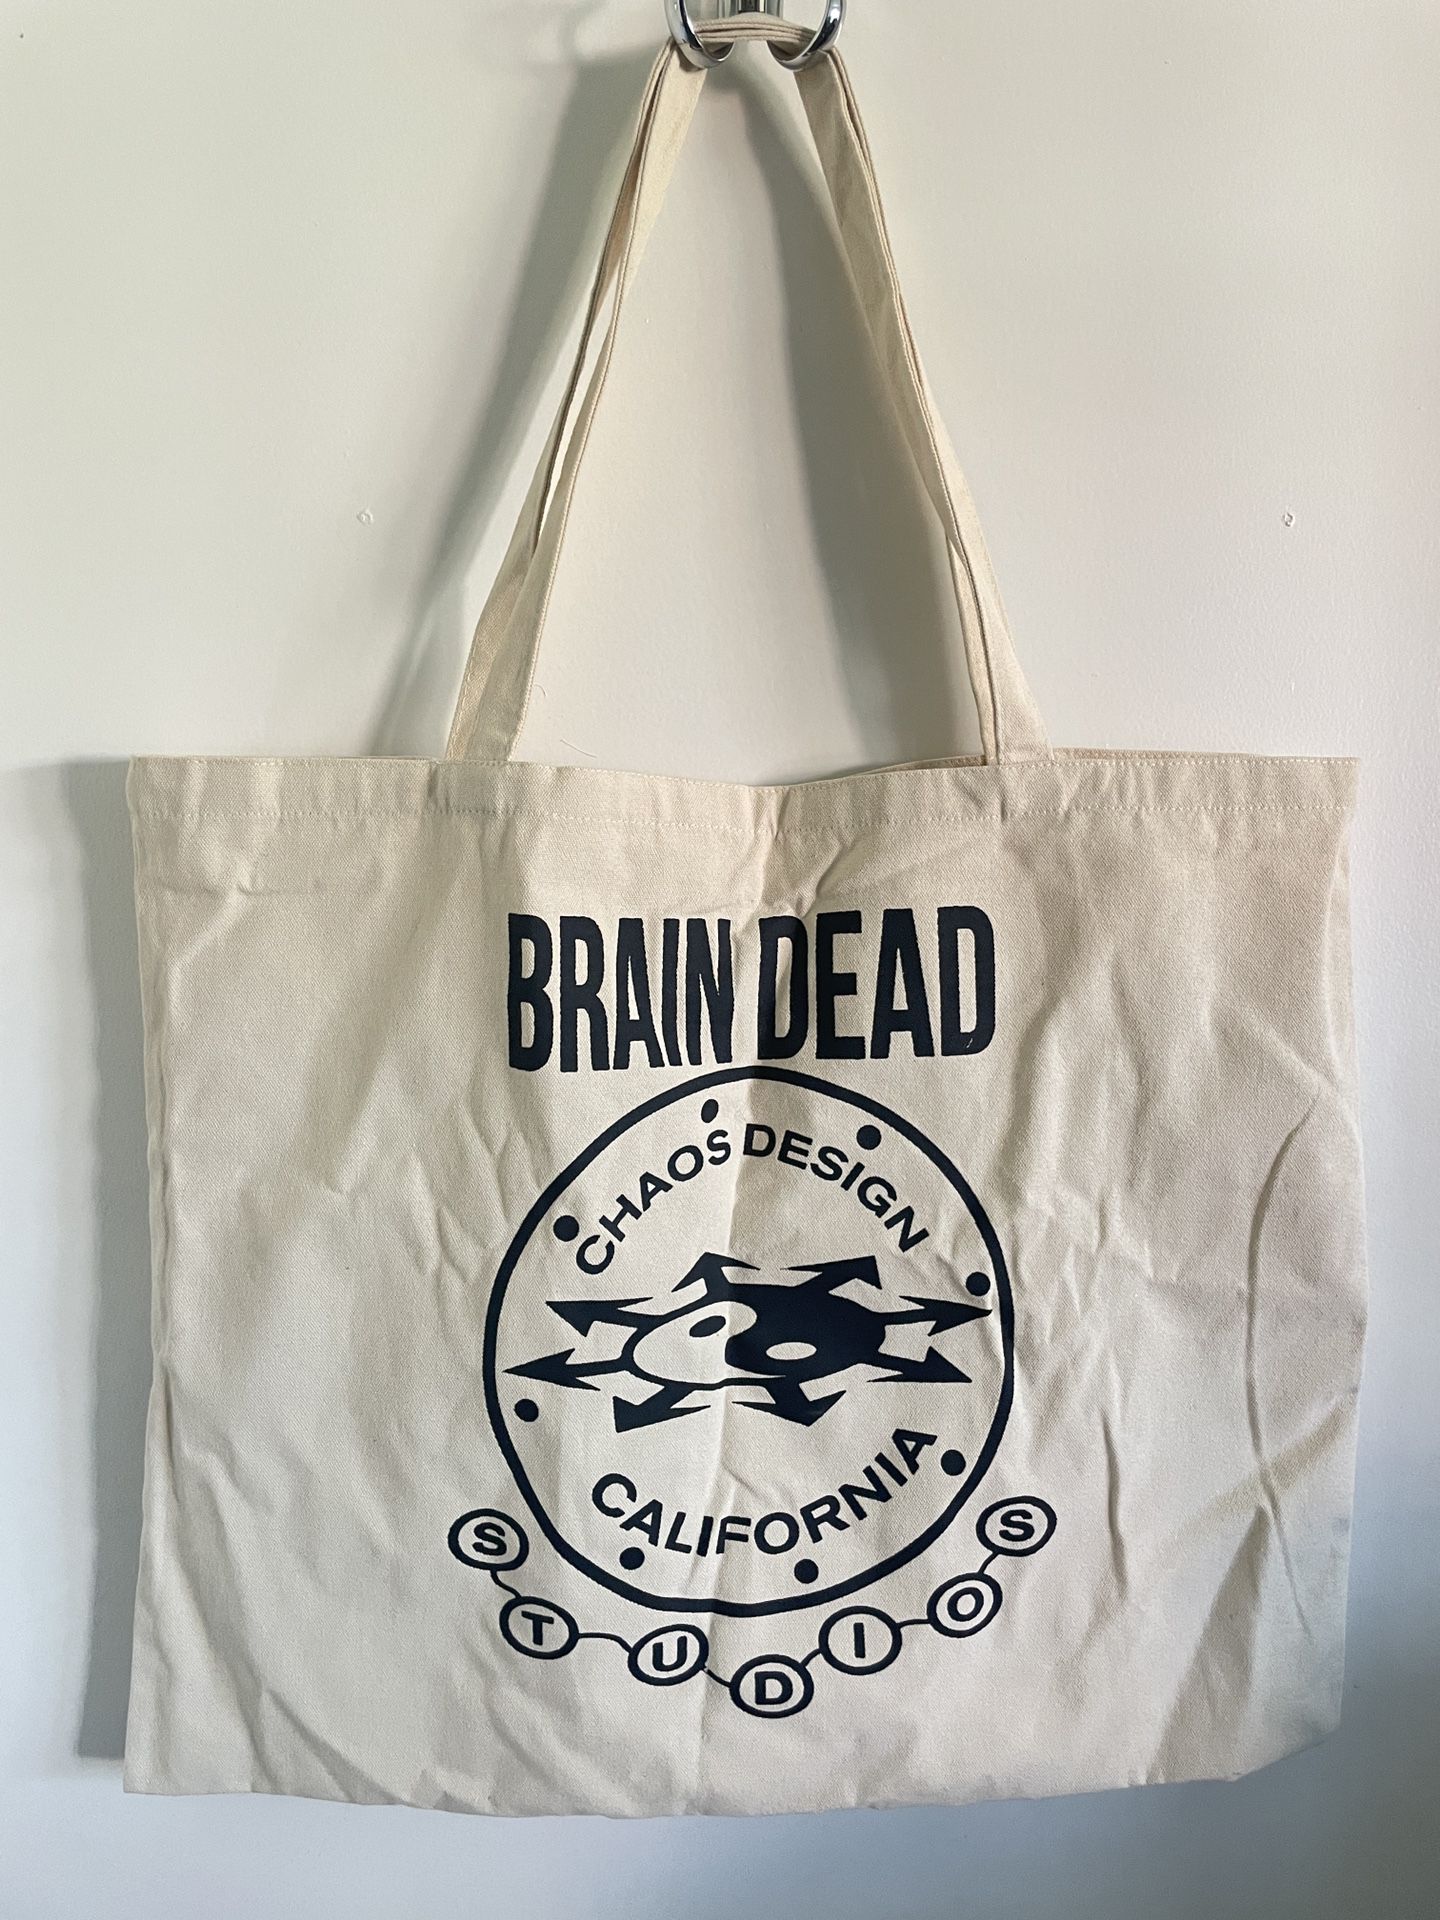 NEW Brain dead fabrications Sunset Chaos Design Beige ivory cream LARGE tote bag